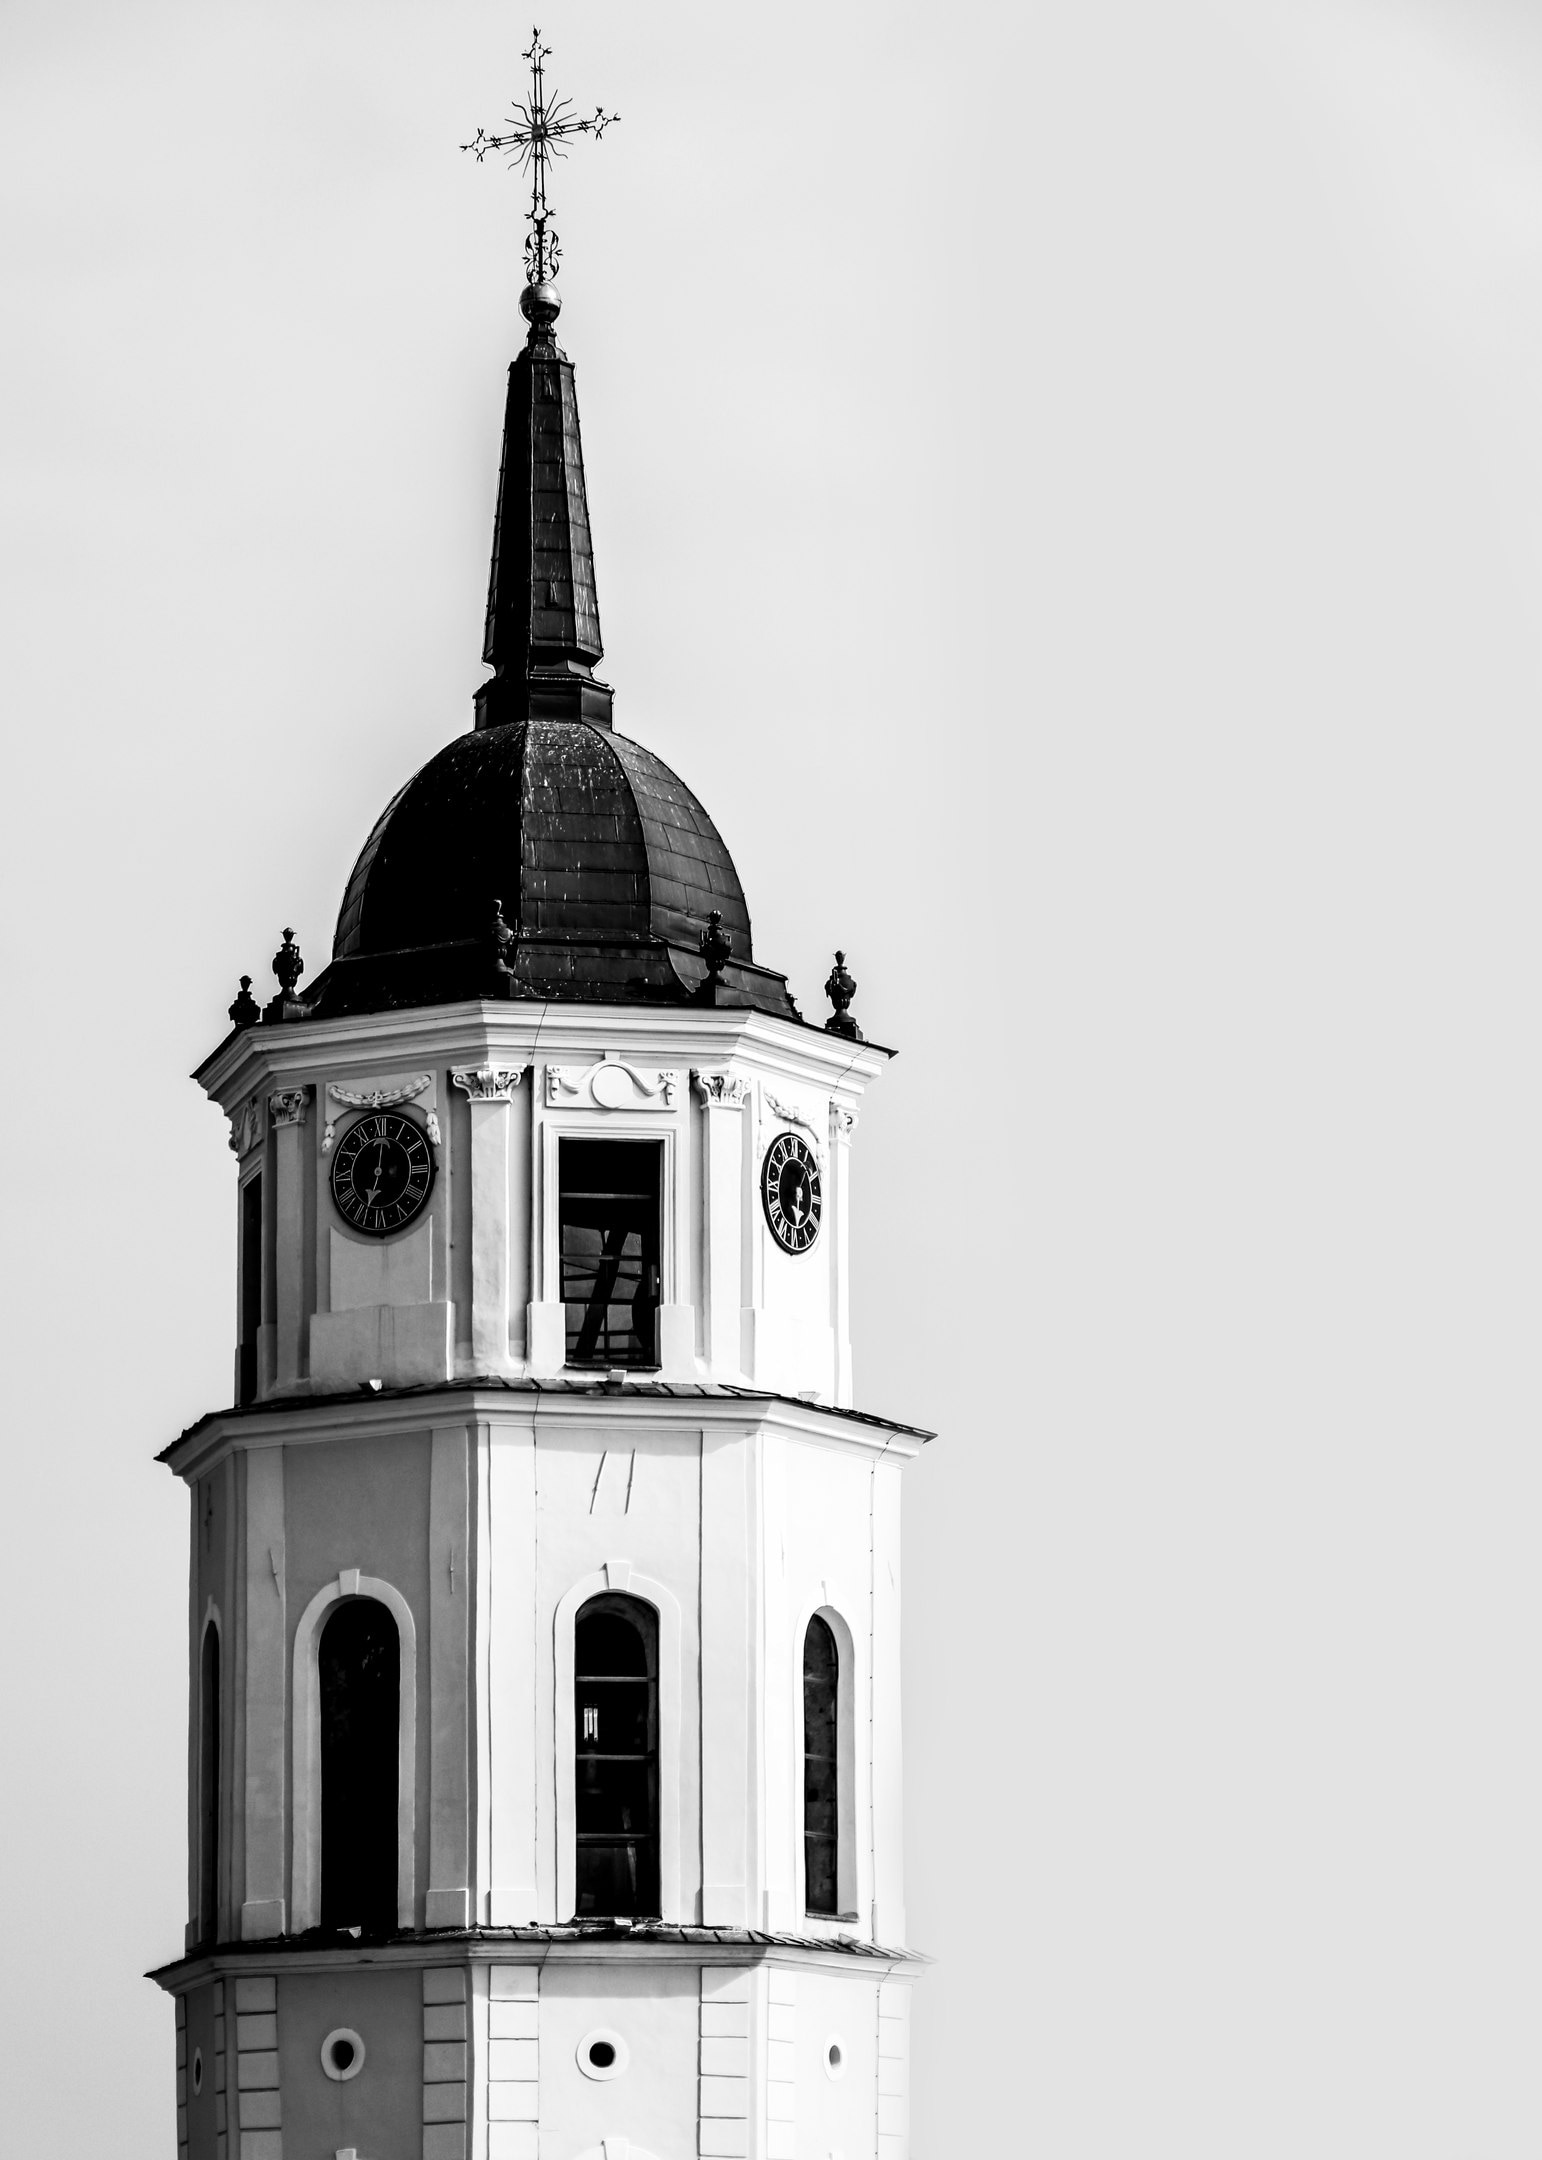 greyscale image of cathedral tower